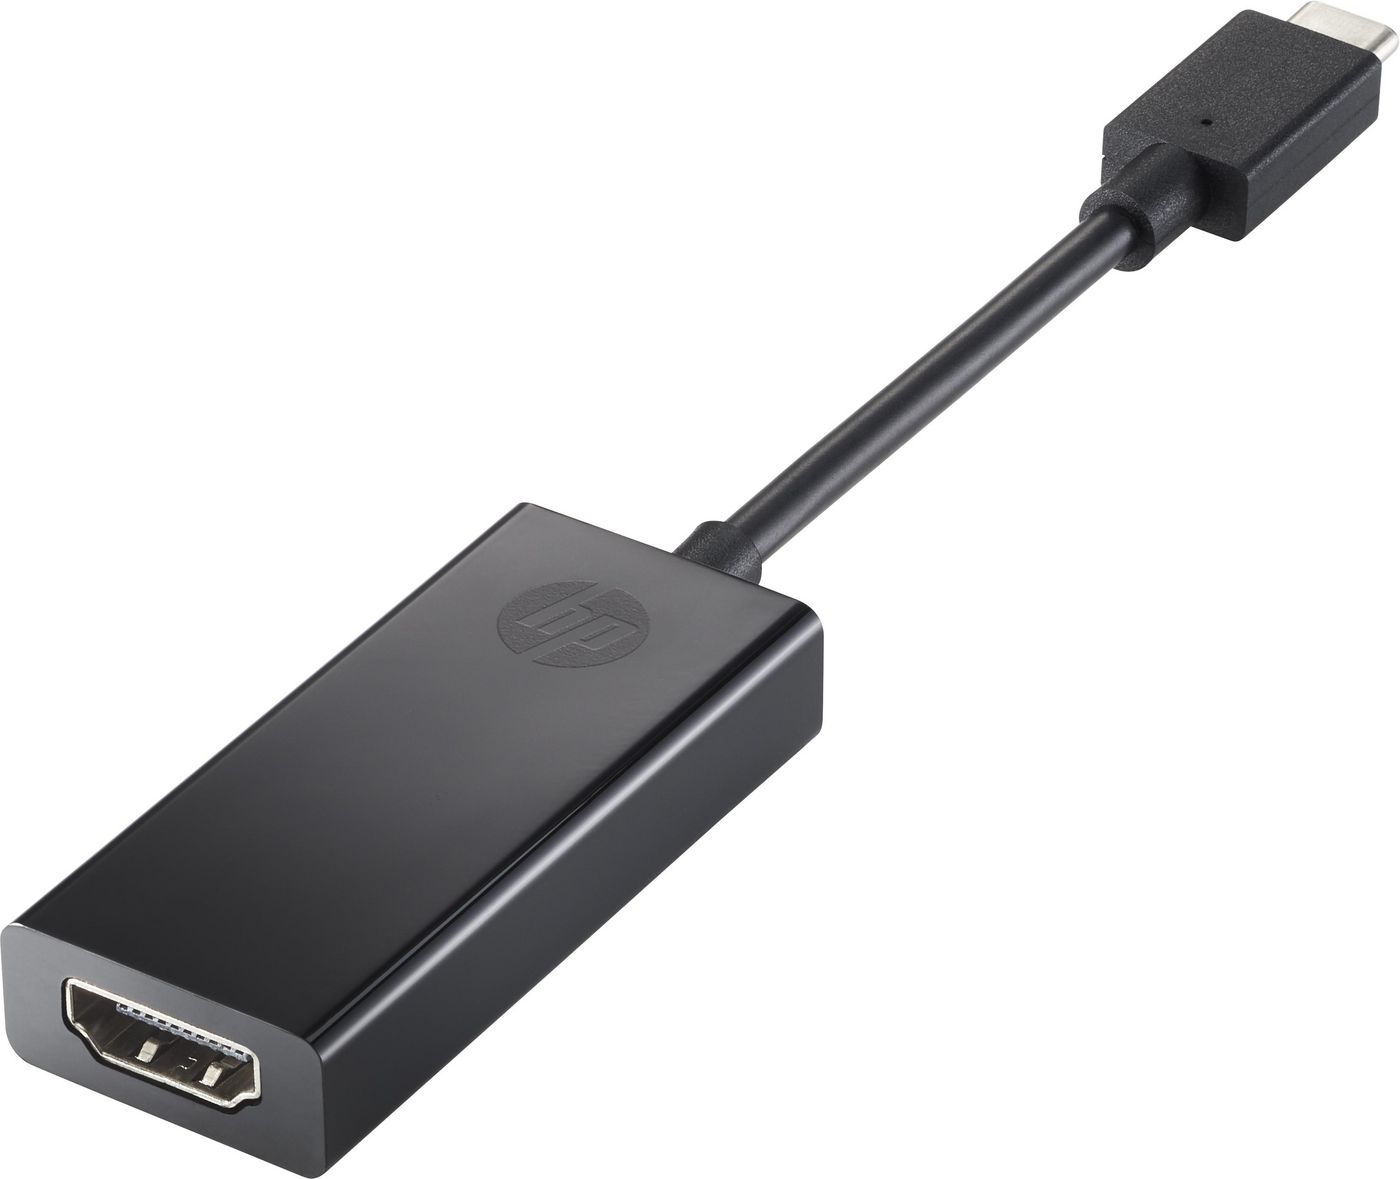 Engage USB-C to HDMI Adapter